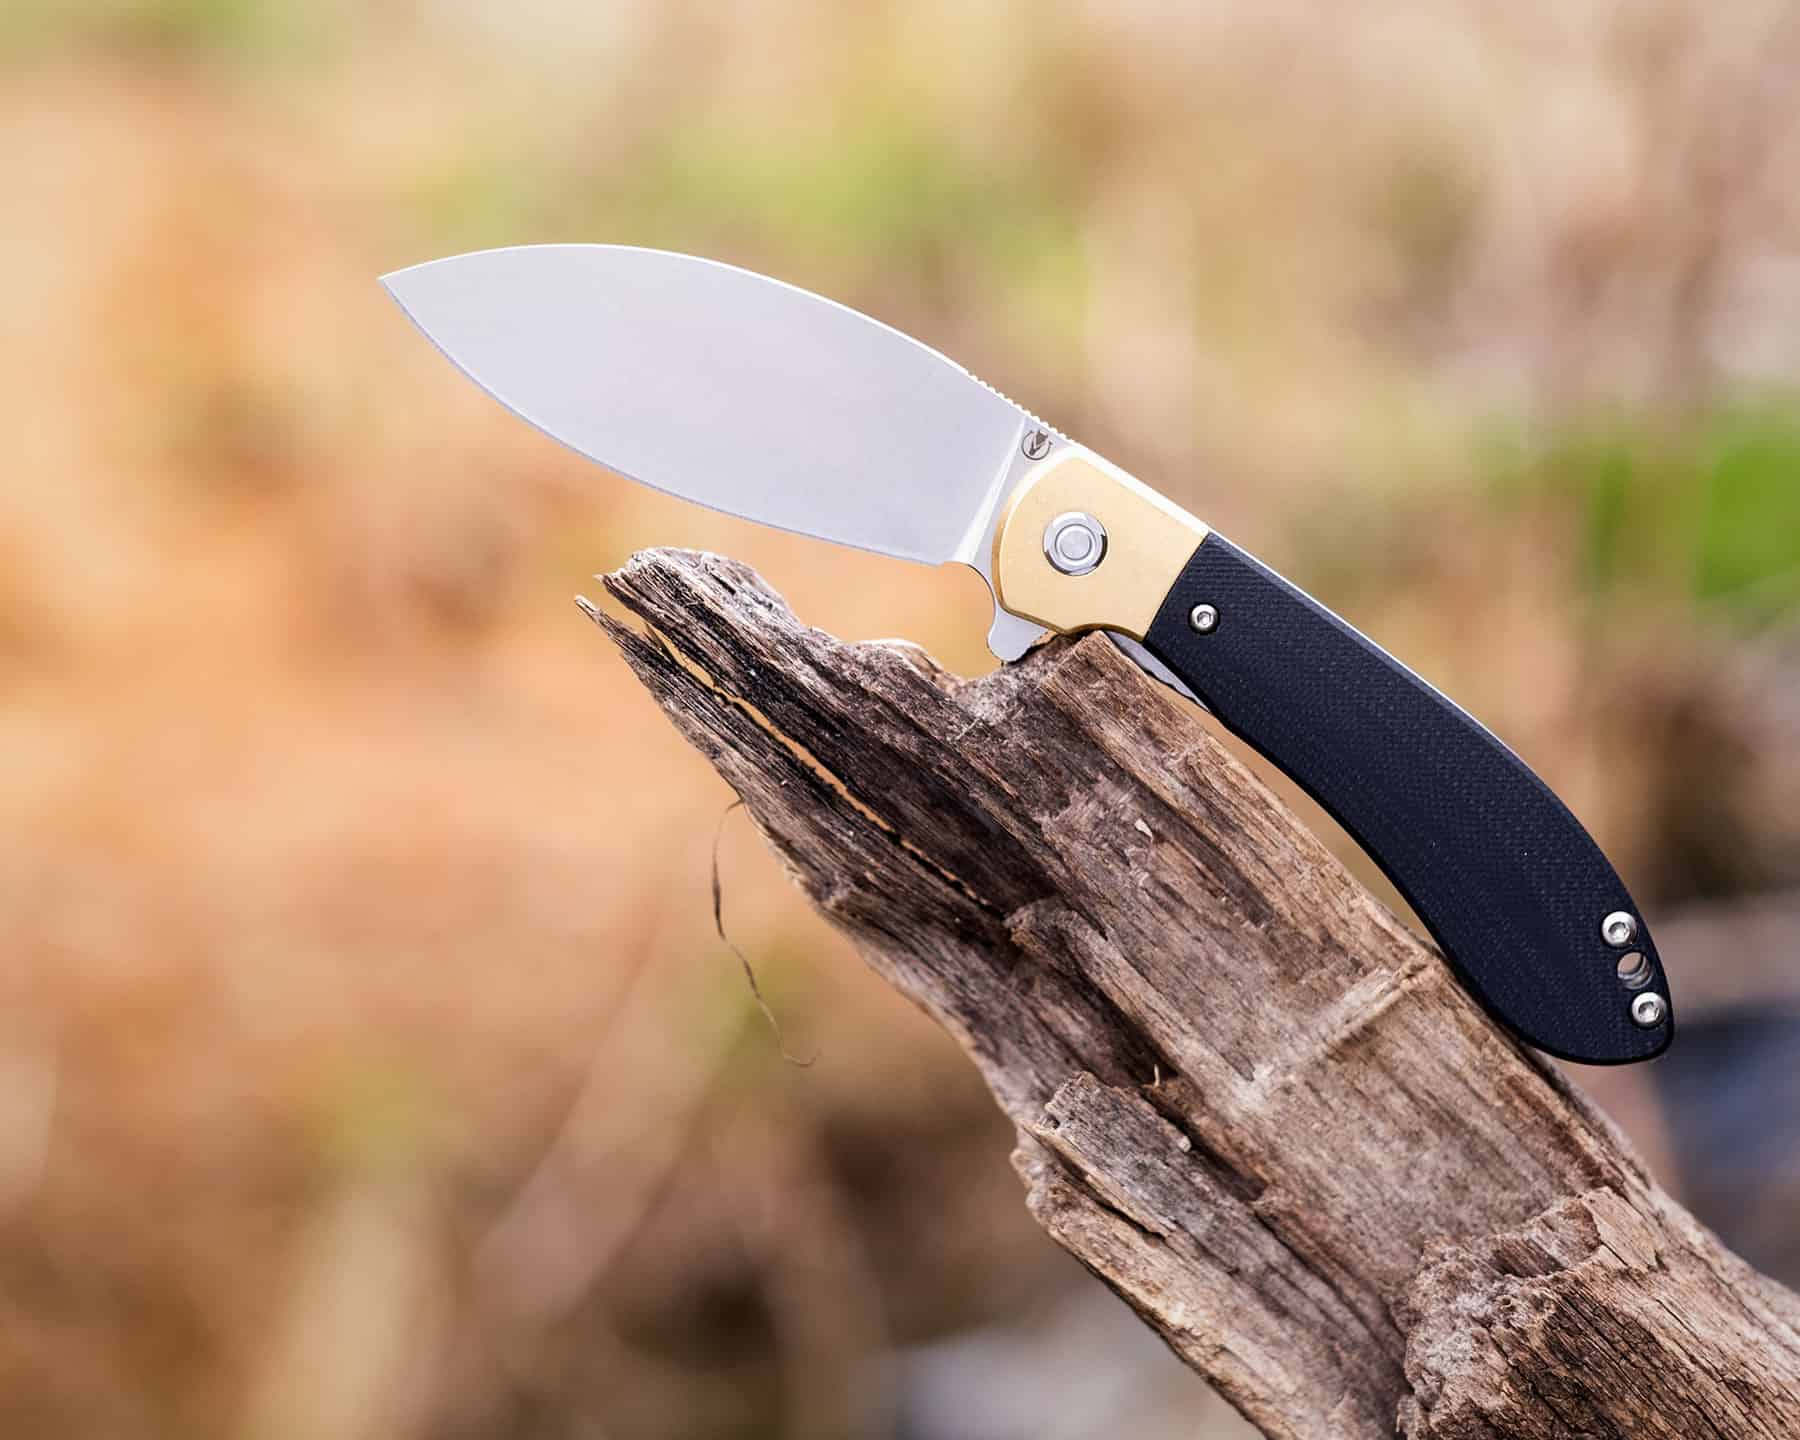 Header image for our in-depth review of the Vosteed Nightshade pocket knife.